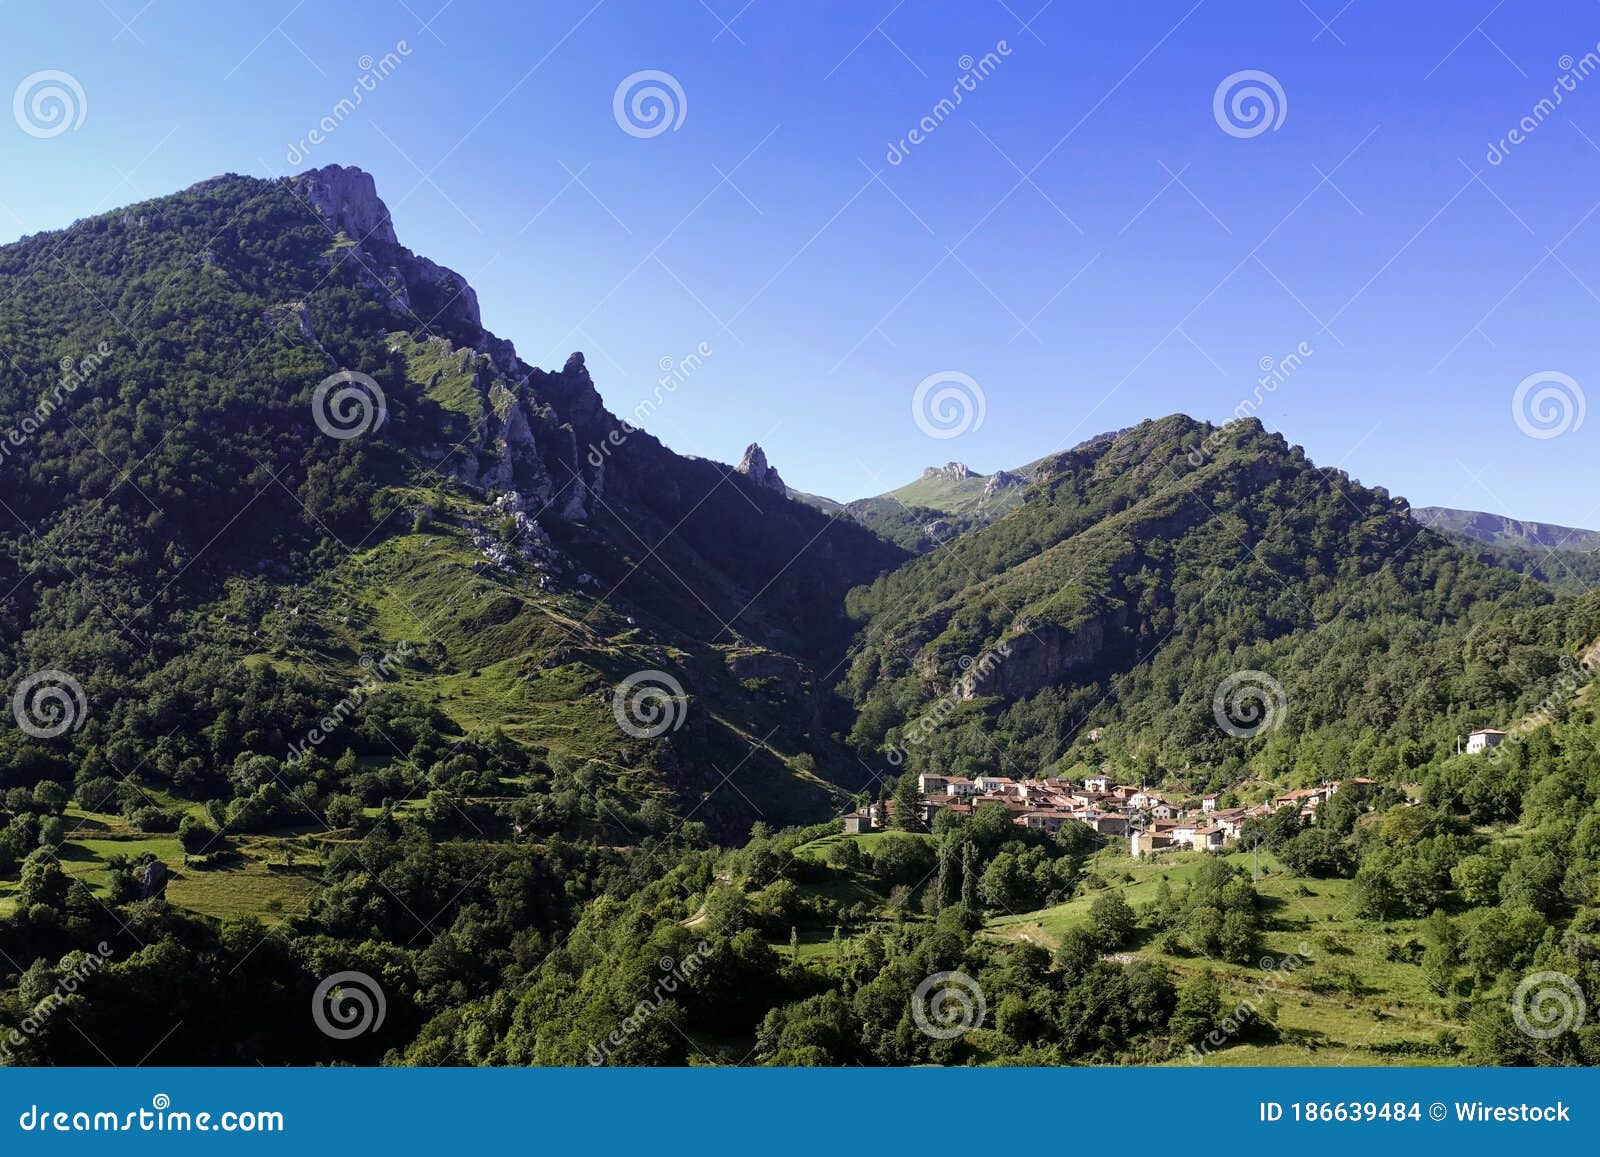 view of a mountain village under a clear blue sky in cucayo, liebana, cantabria, spain